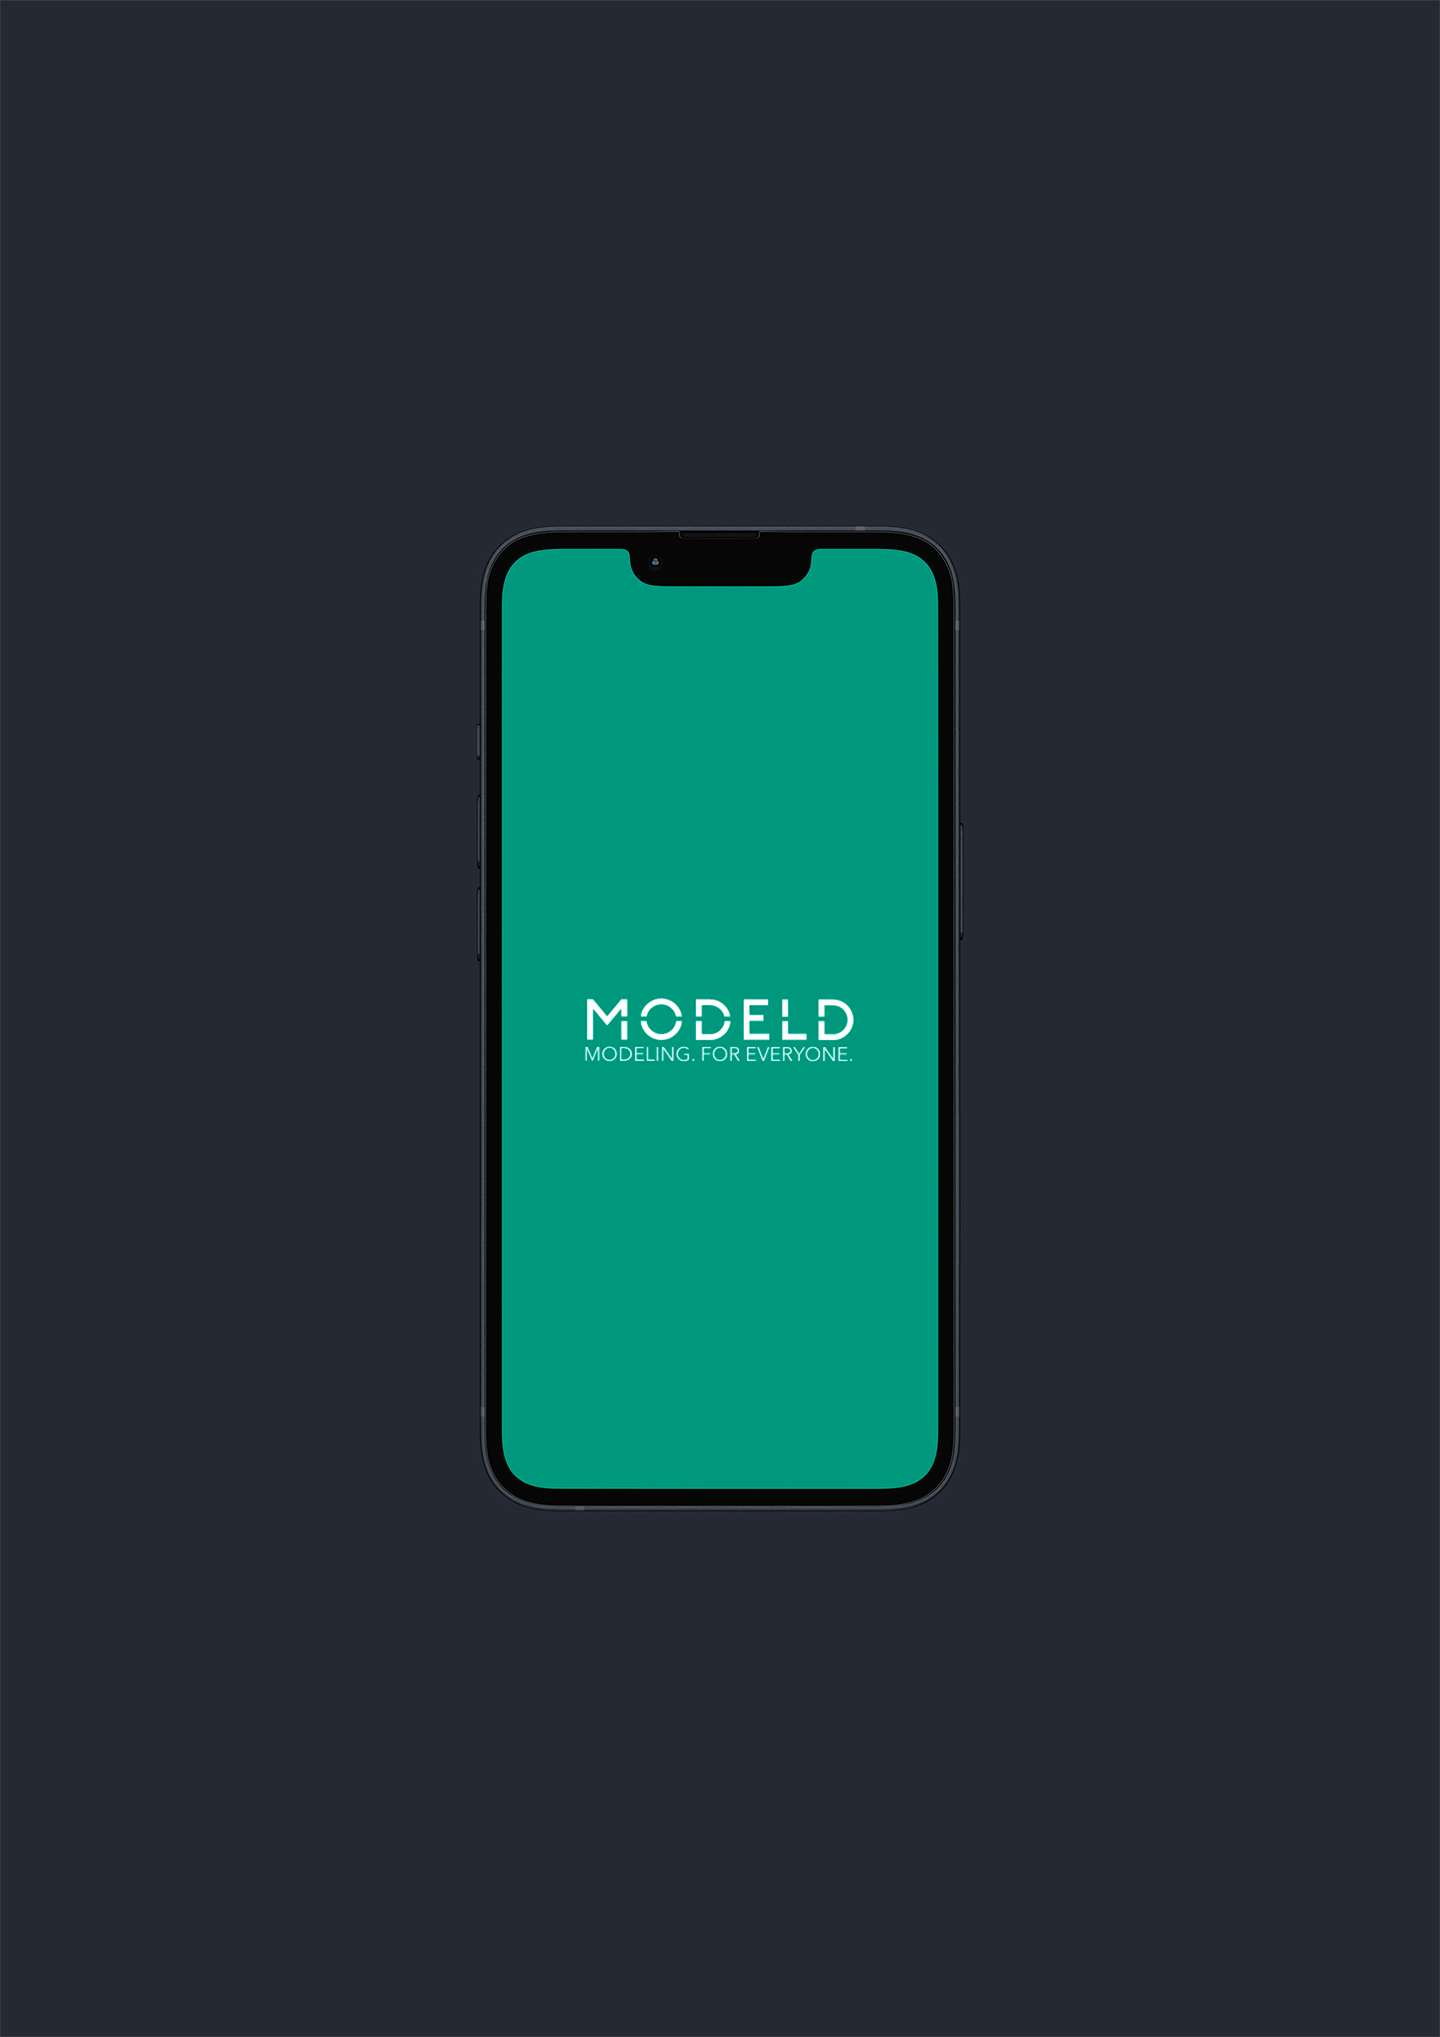 A platform connecting brands, companies, and professionals directly with models, Modeld eliminates intermediaries for a more efficient, inclusive and safe industry, while democratising access to modeling opportunities